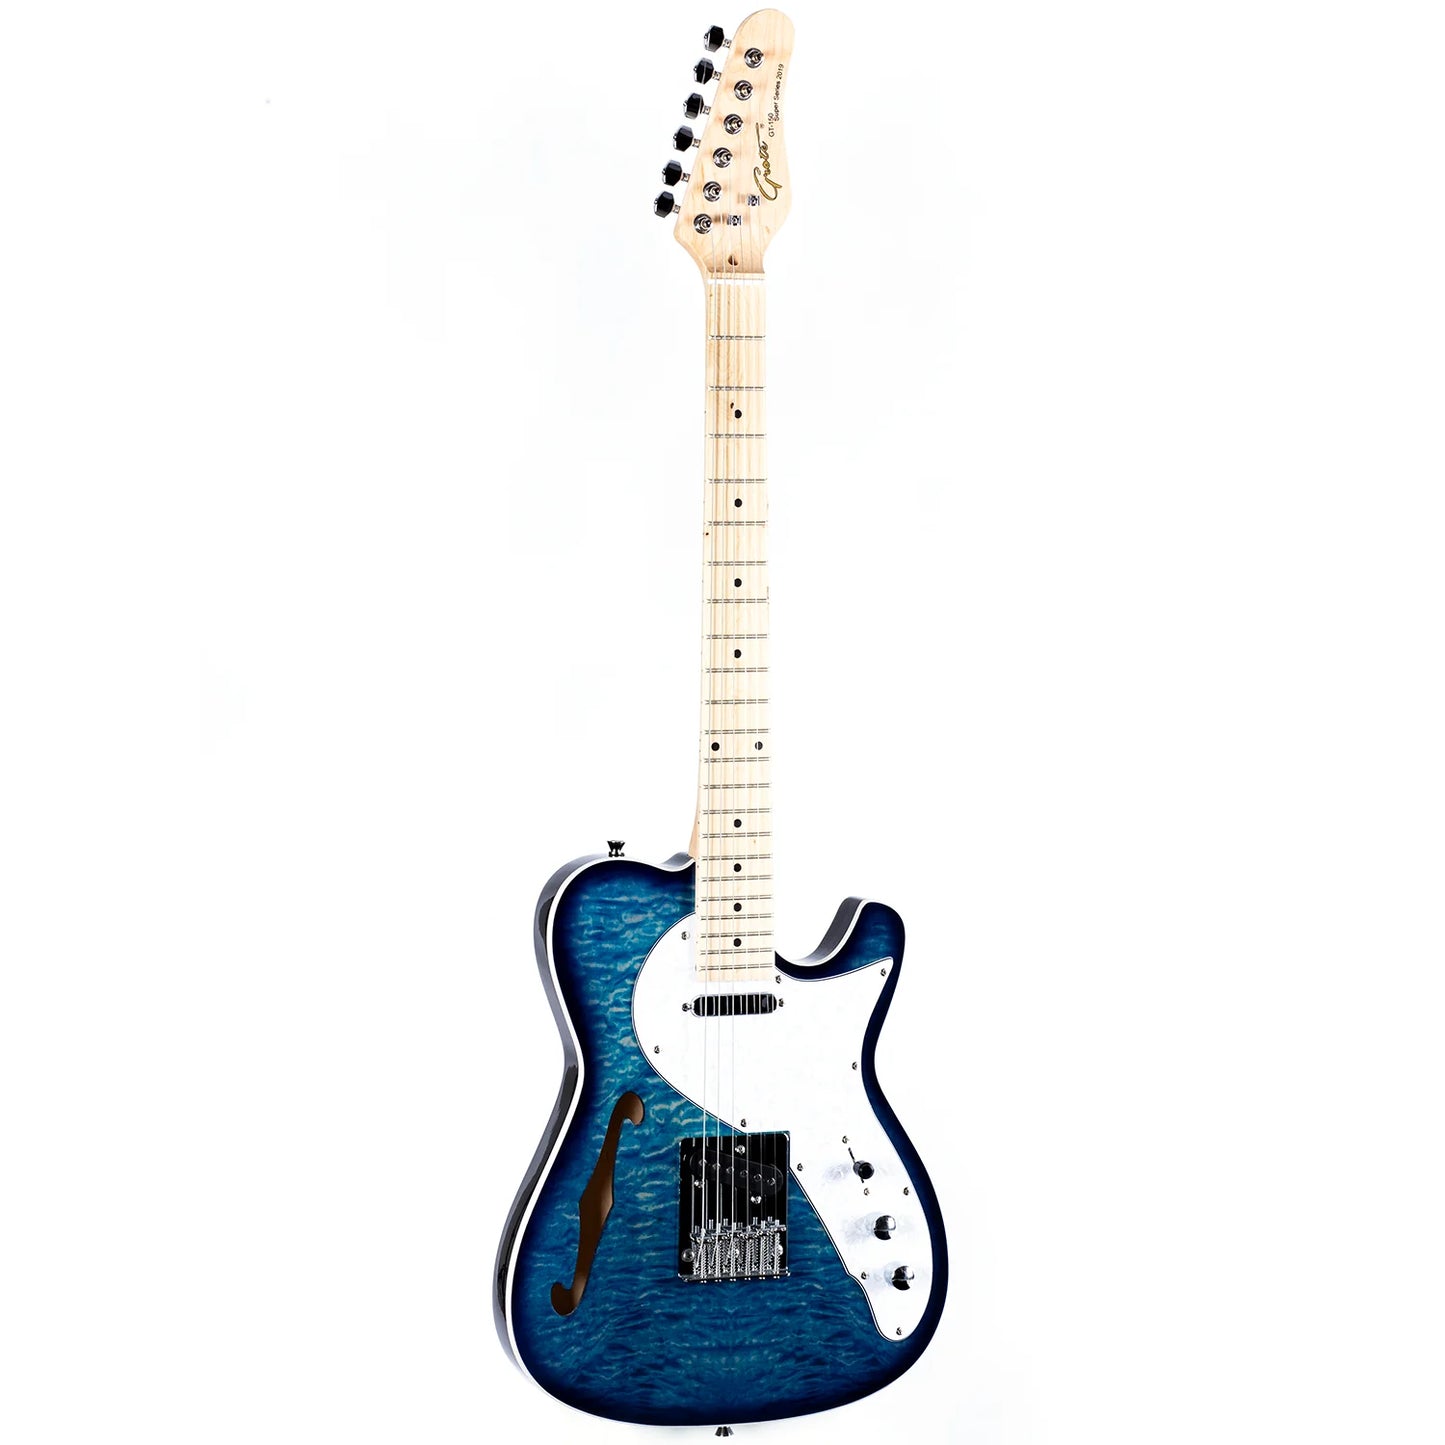 GROTE ELECTRIC GUITAR SEMI-HOLLOW BODY SINGLE F-HOLE TELE STYLE GUITAR FULL-SIZE BASSWOOD WITH CANADIA MAPLE NECK CHROME HARDWARE PICKS - BLUE